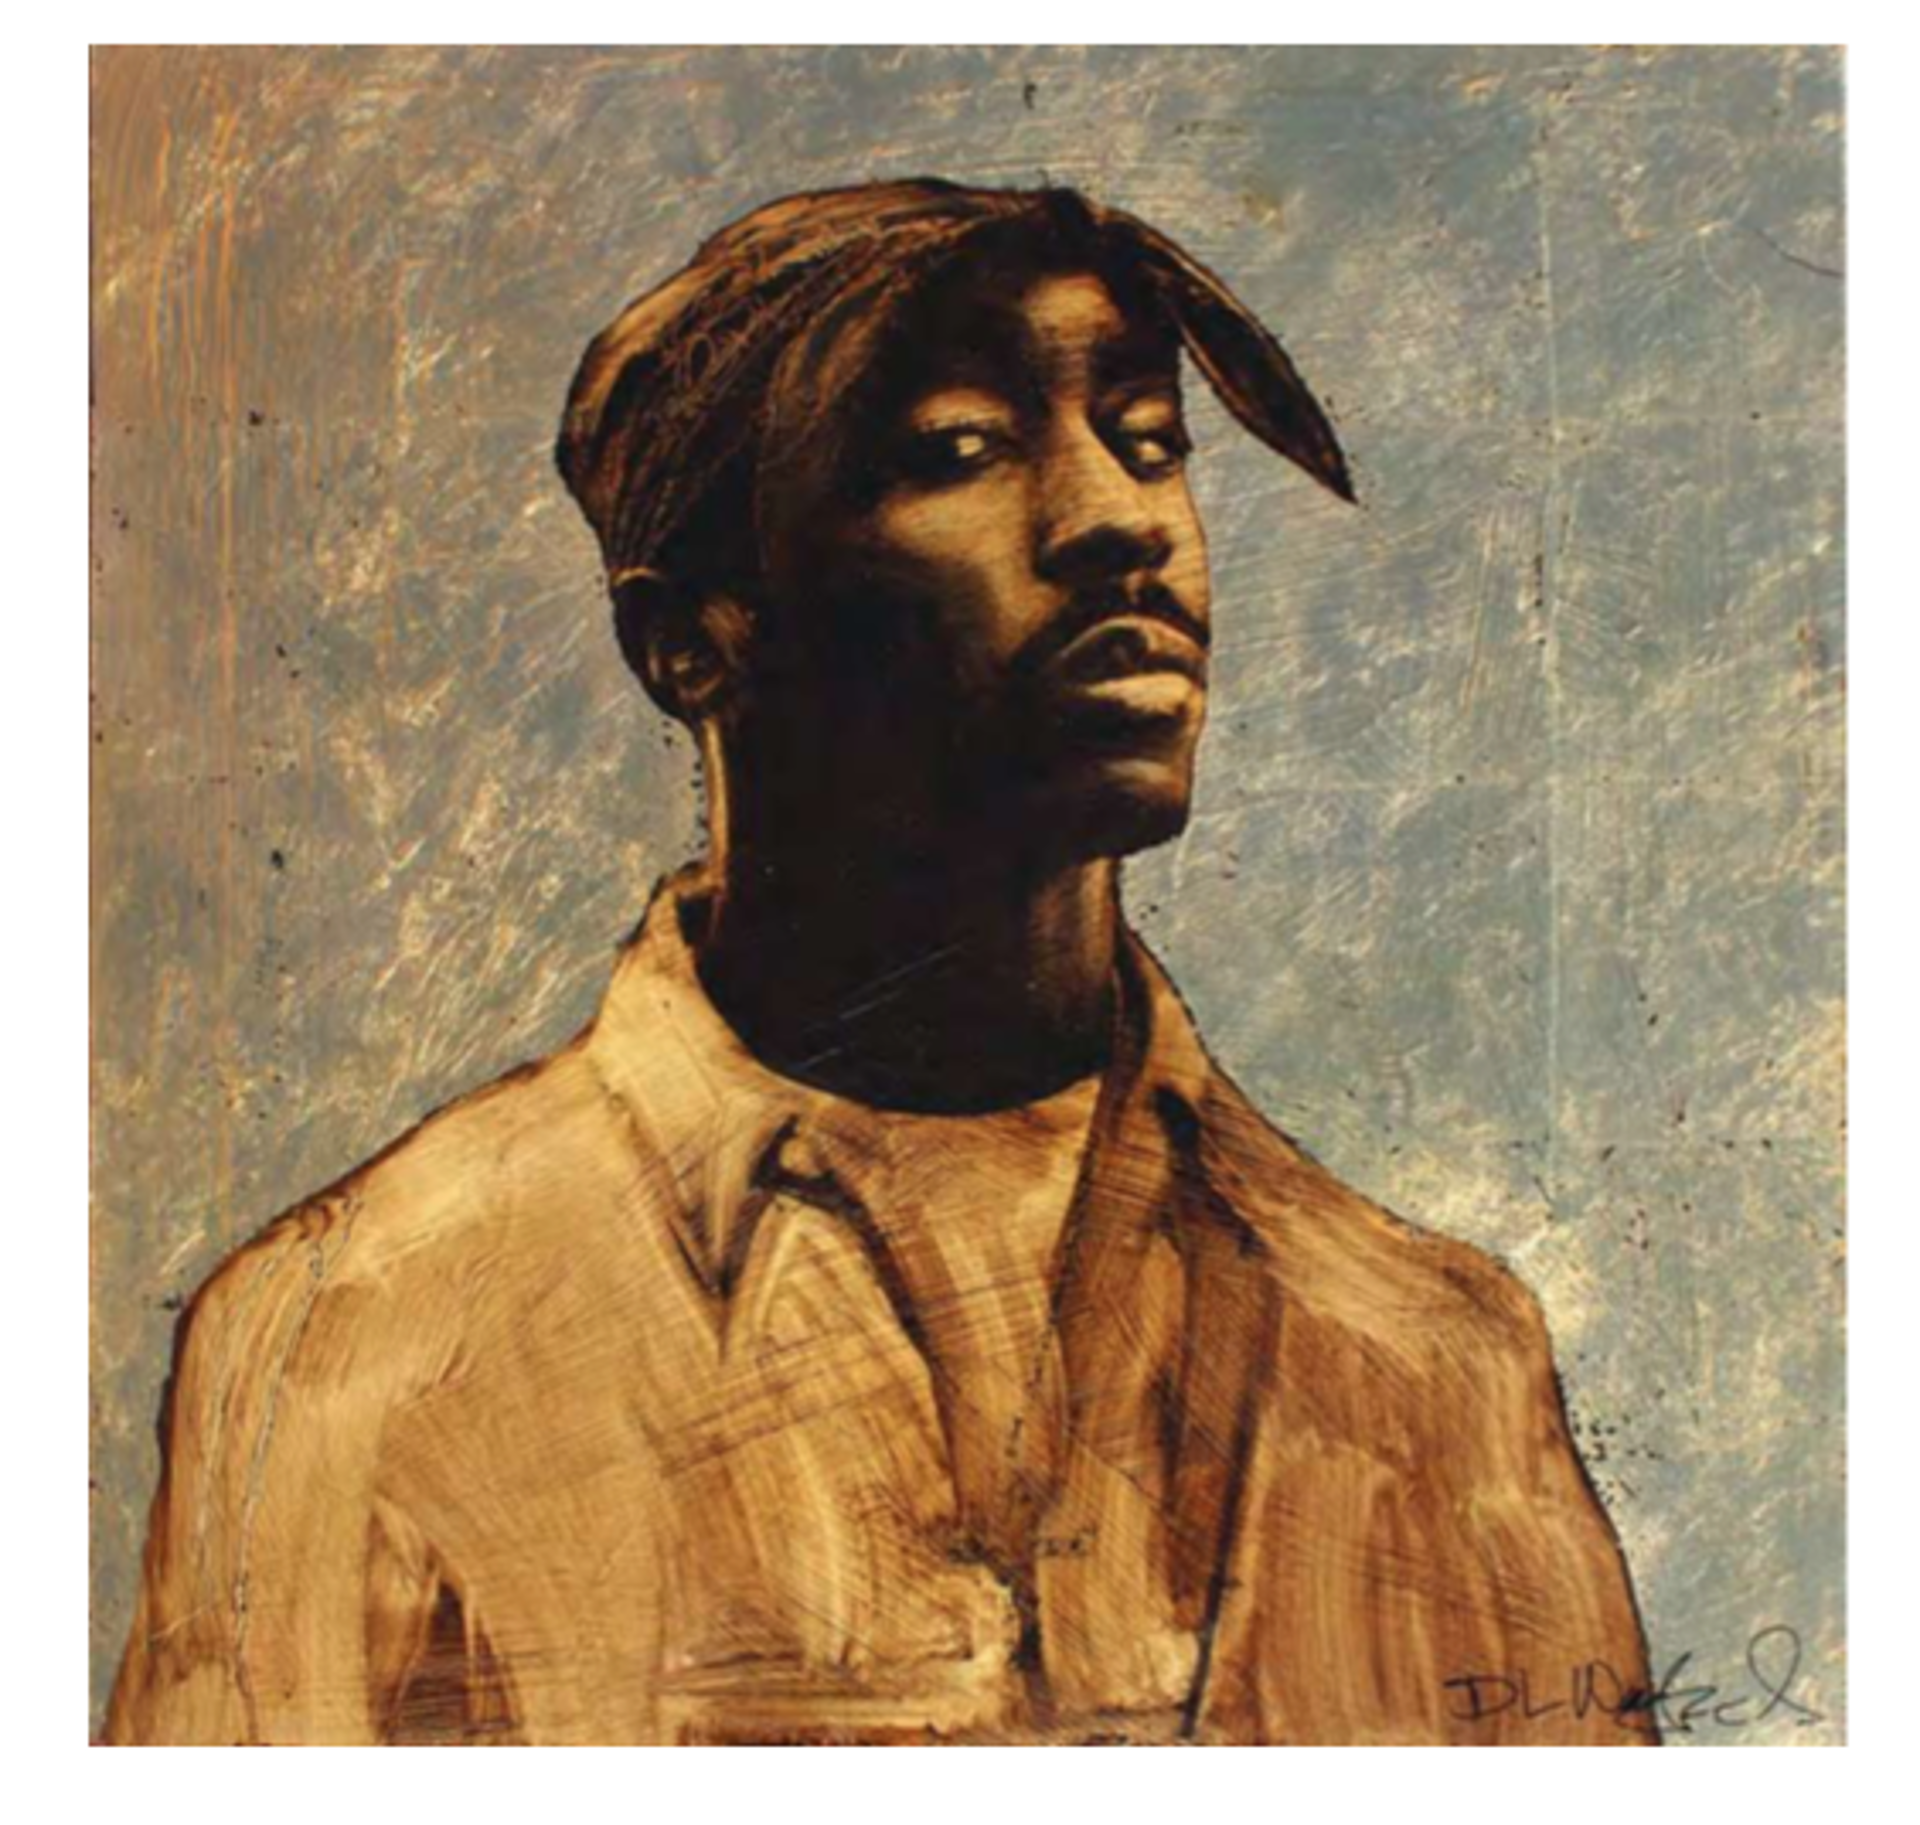 BROTHER PAC by DL Warfield